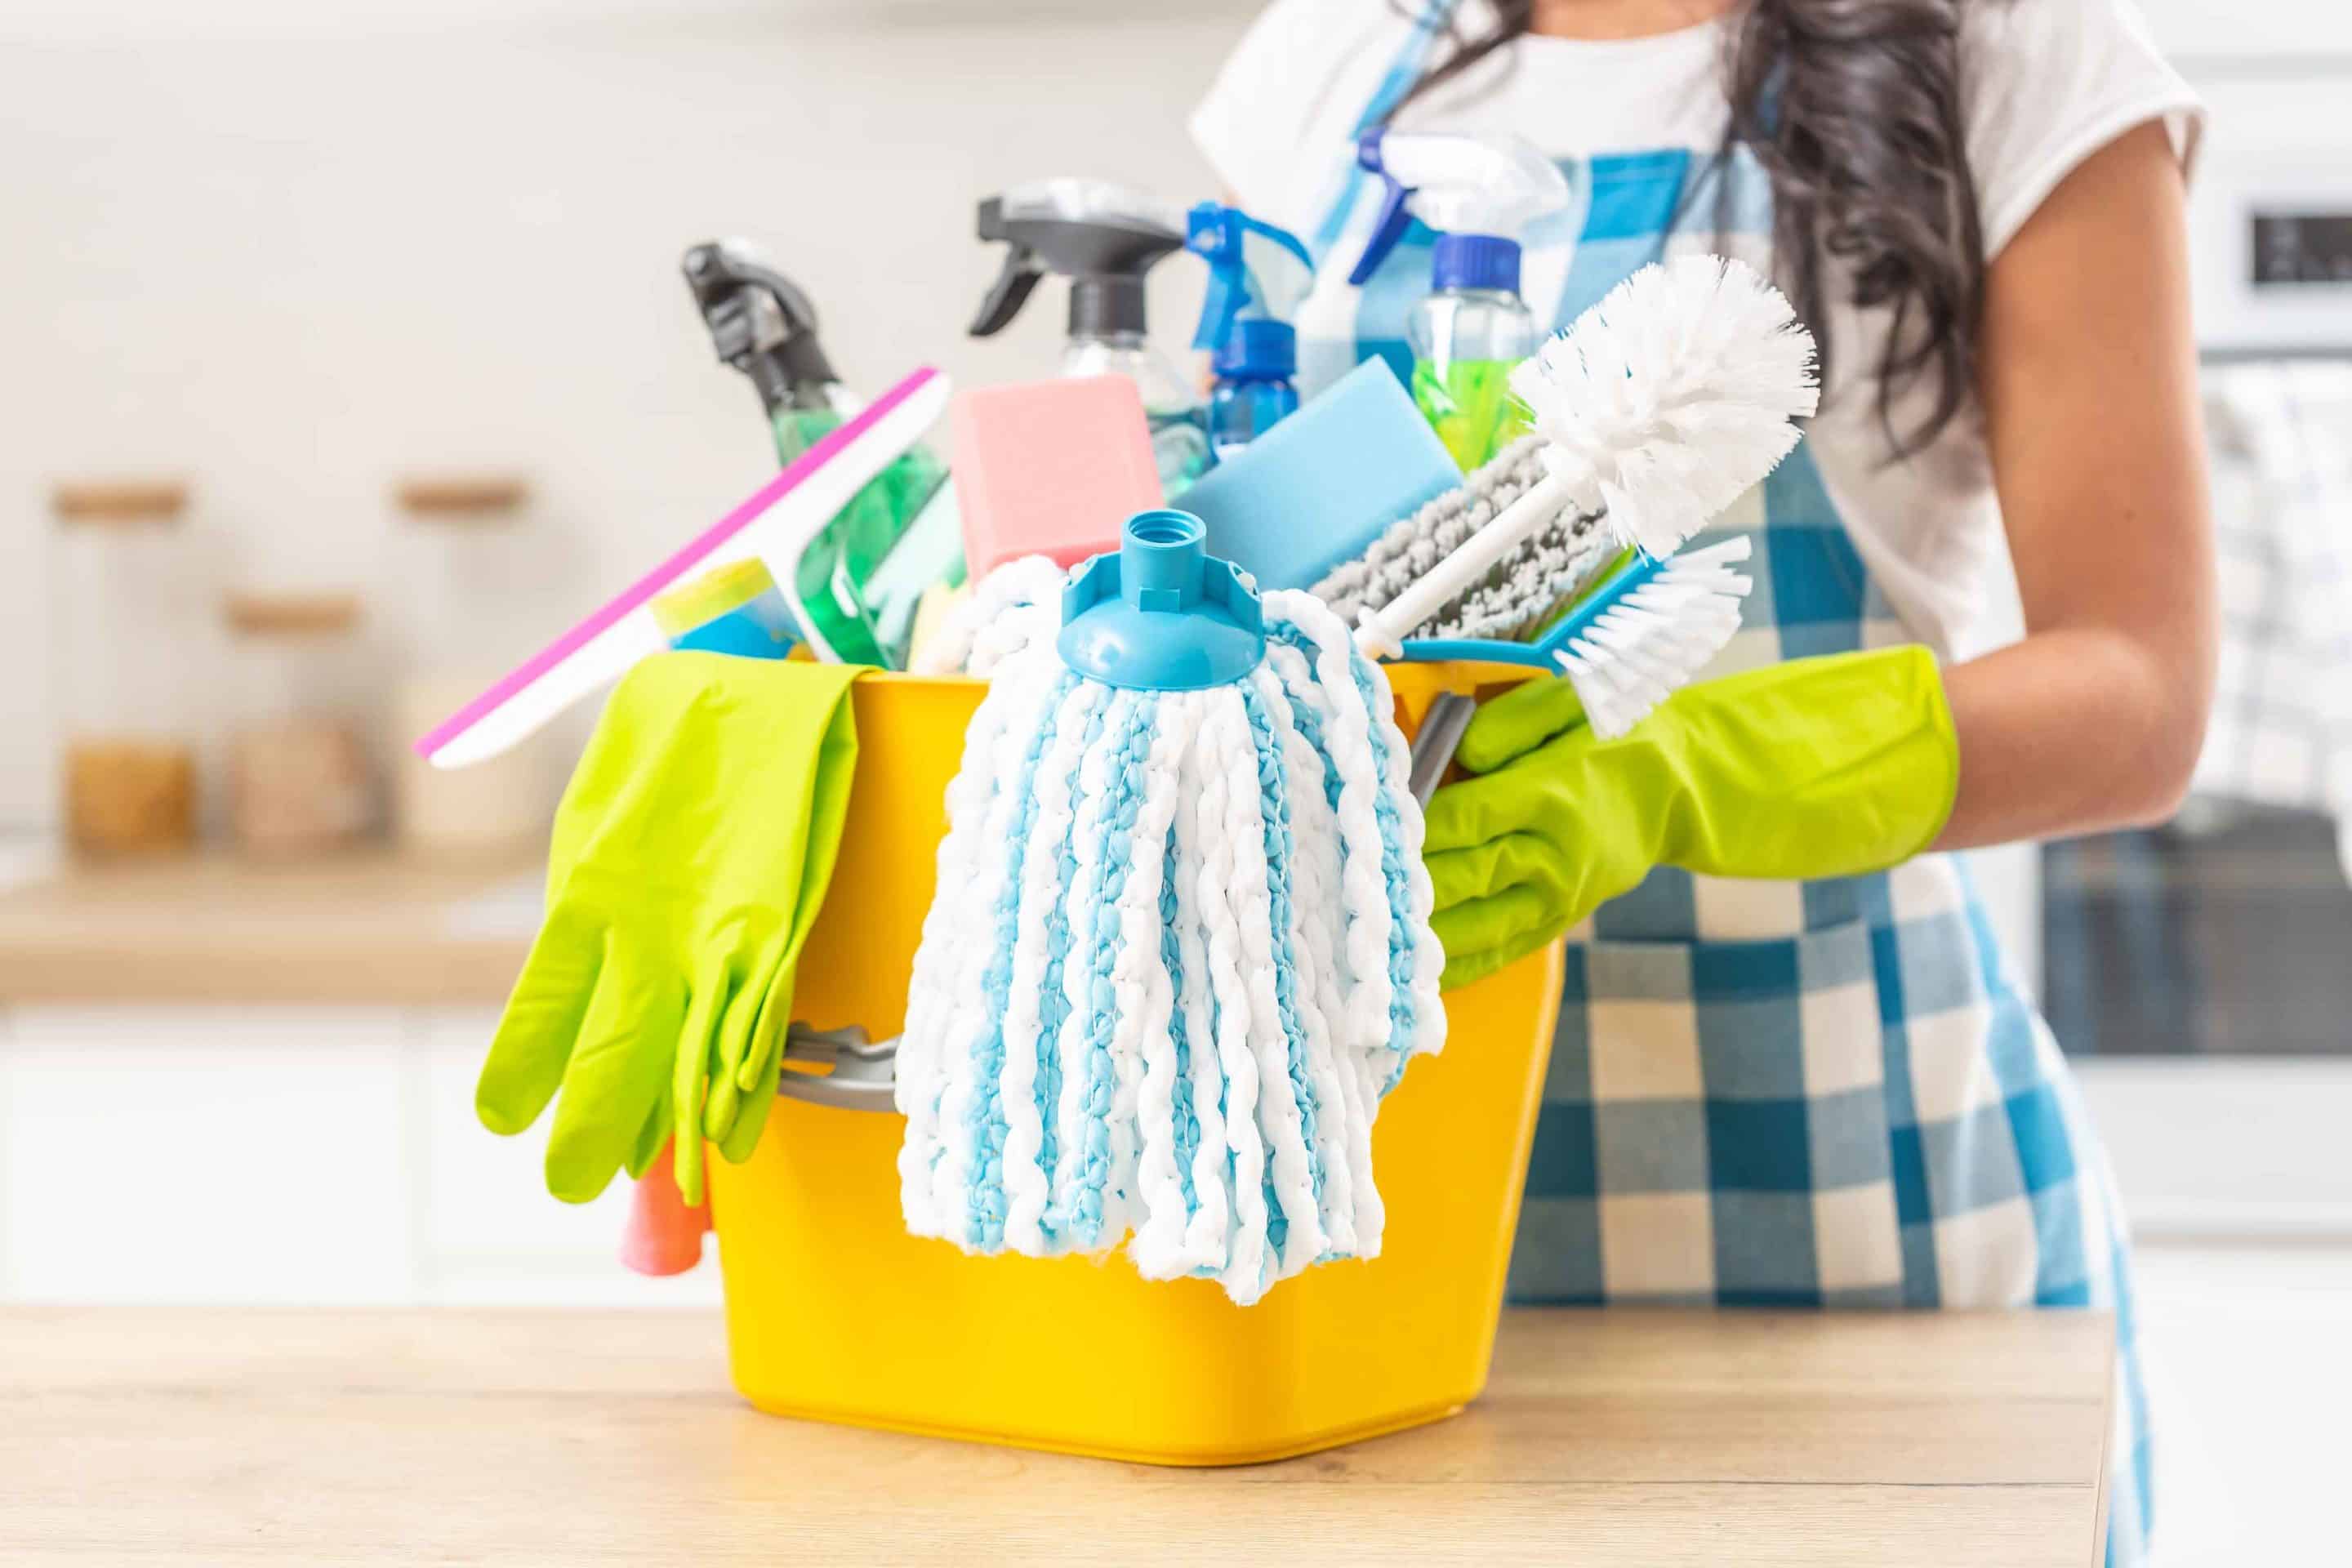 Bucket of Cleaning Tools — Cleaning Supplies in Aitkenvale, QLD